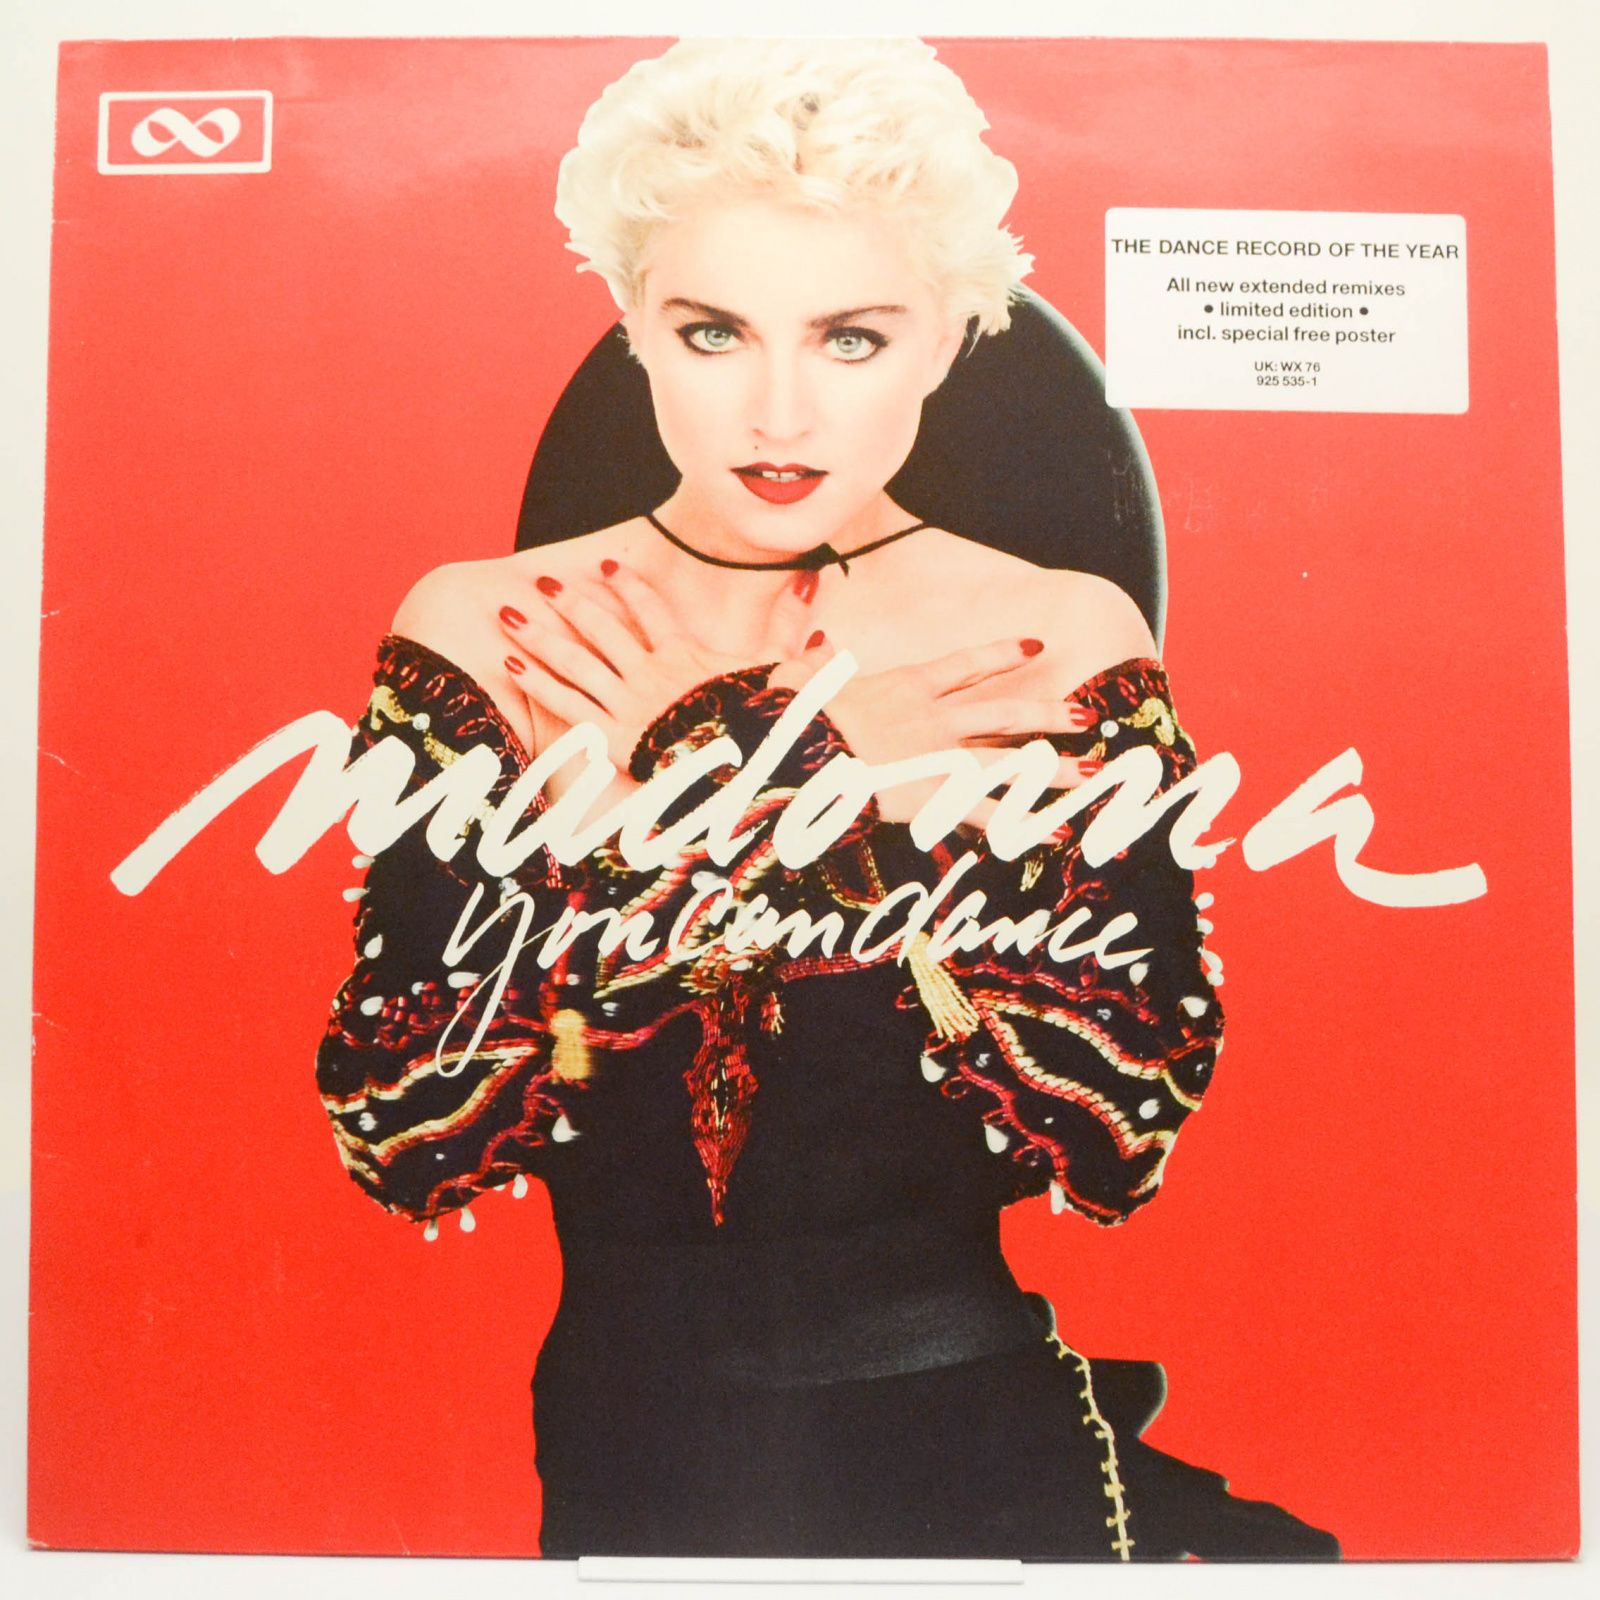 Madonna — You Can Dance, 1987